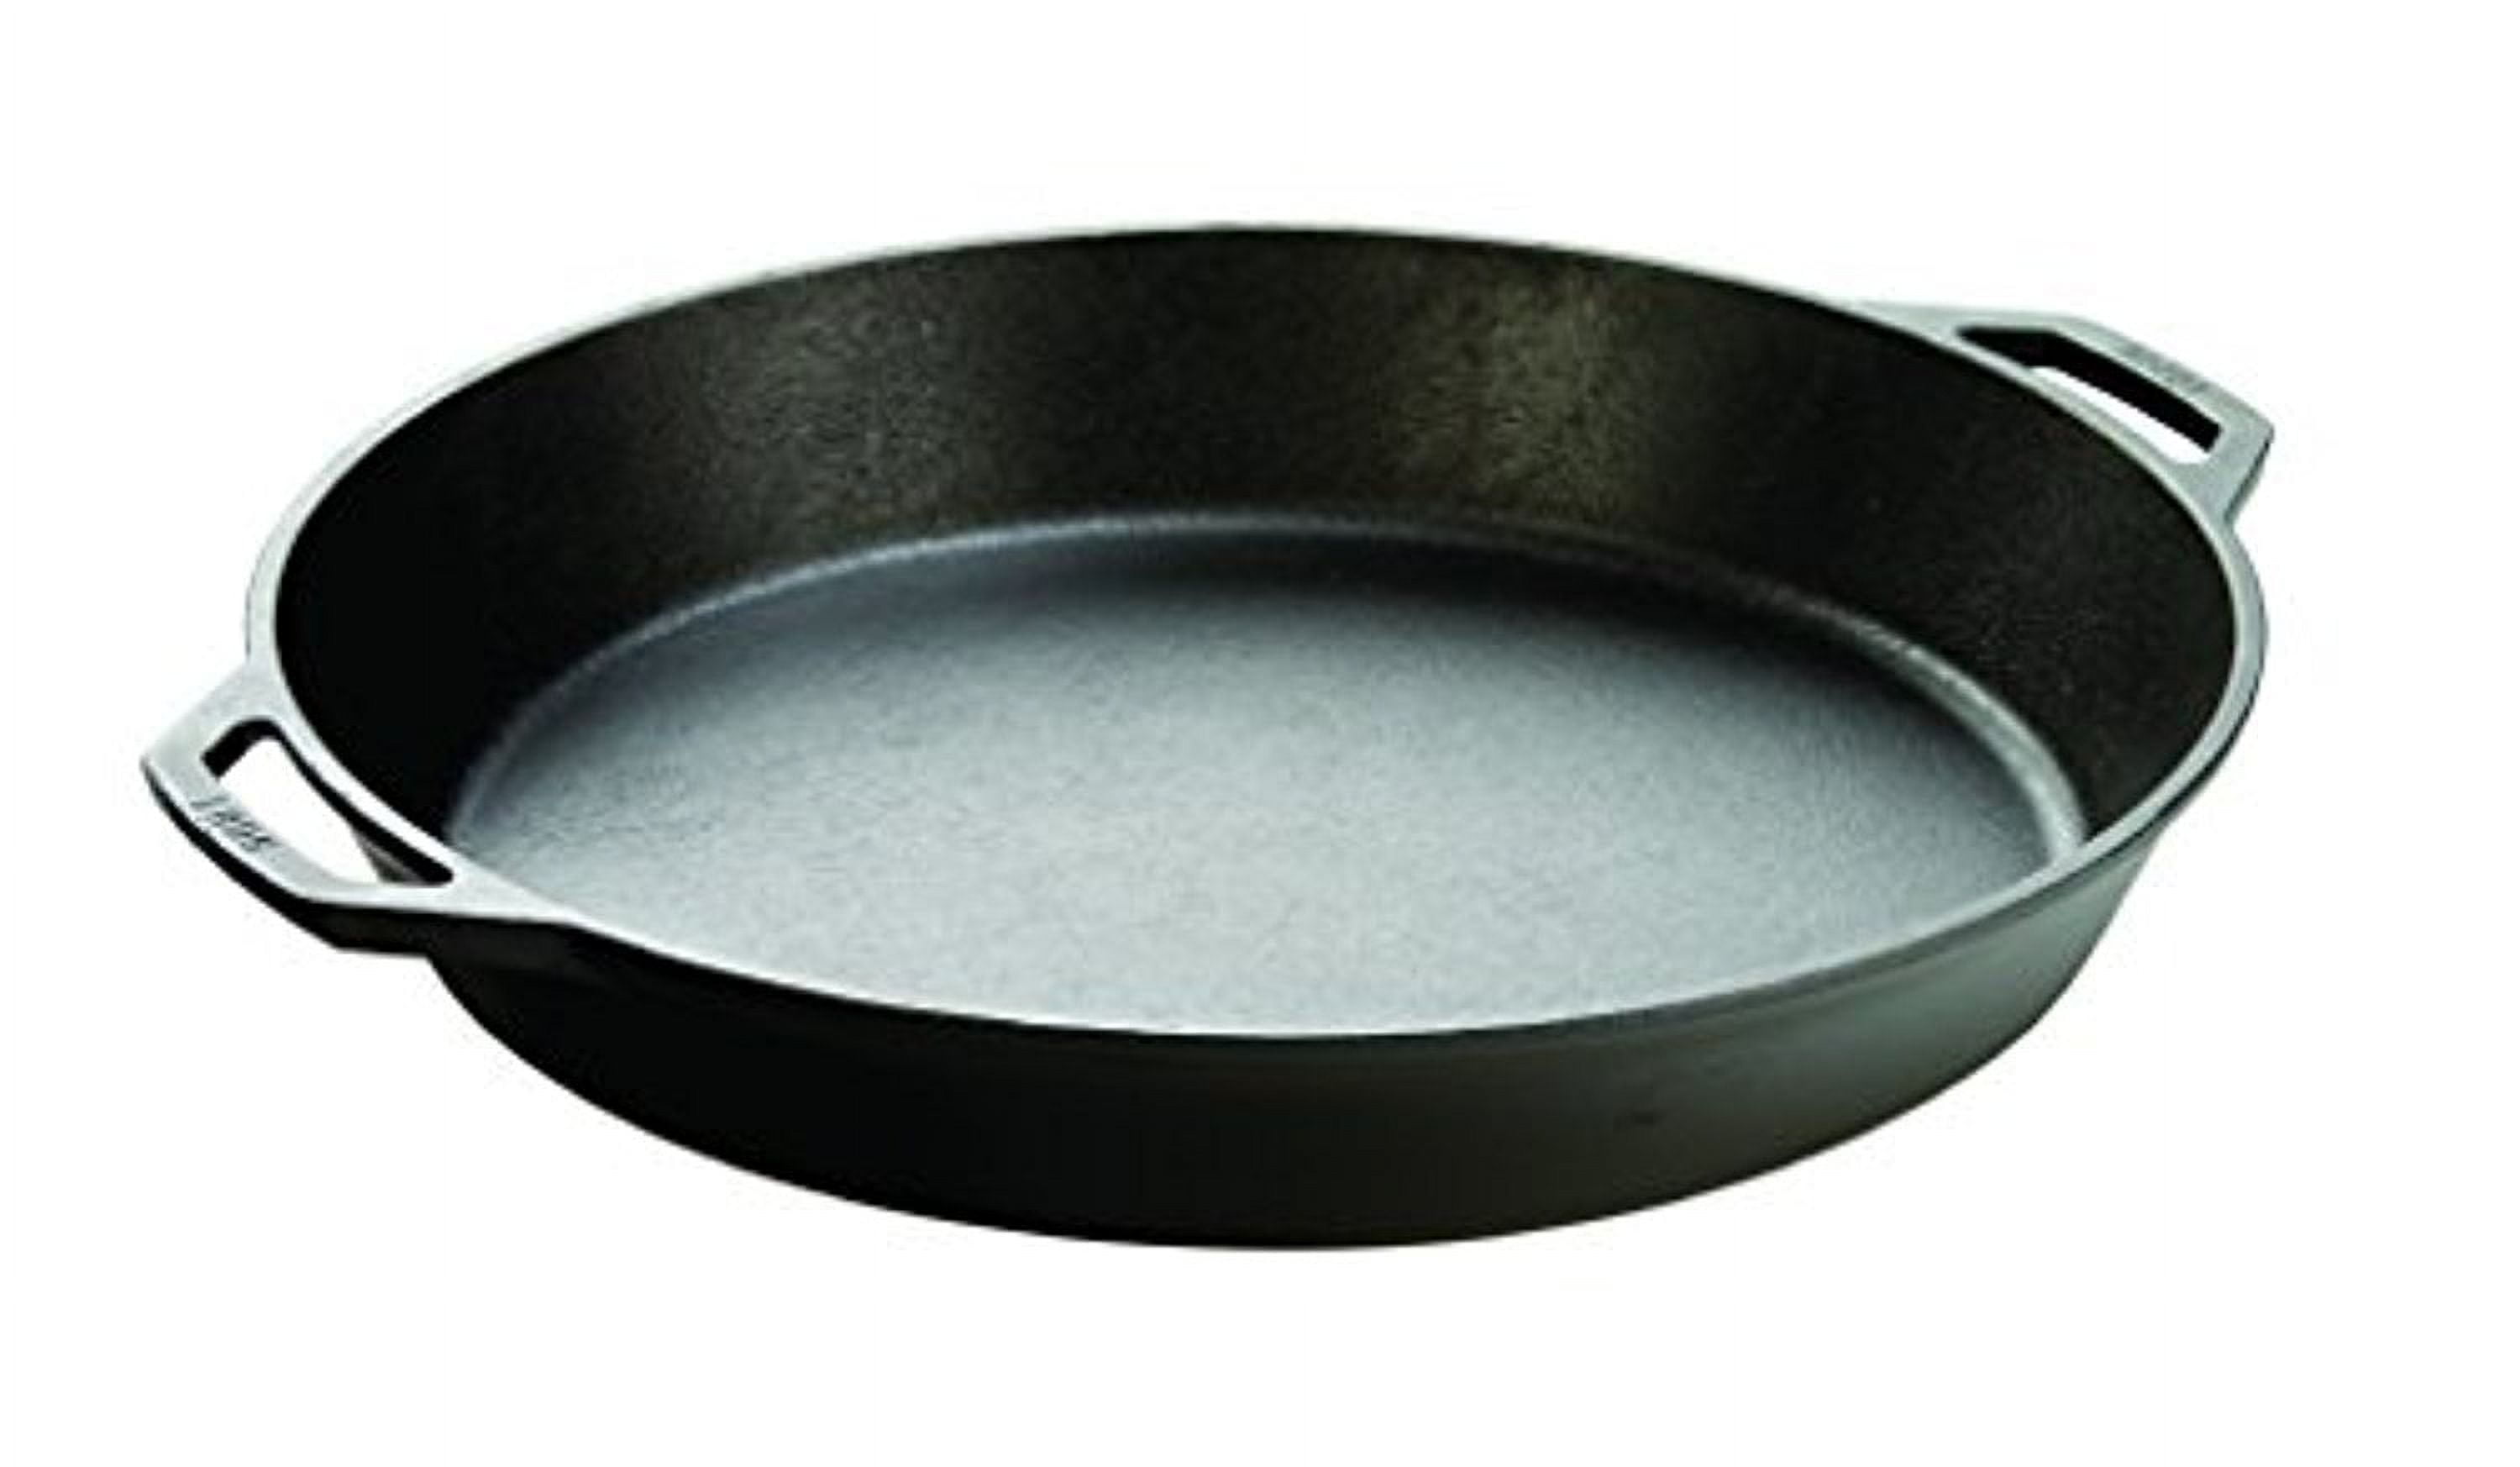 Lodge Pre-Seasoned Cast Iron Skillet Review - Mishry